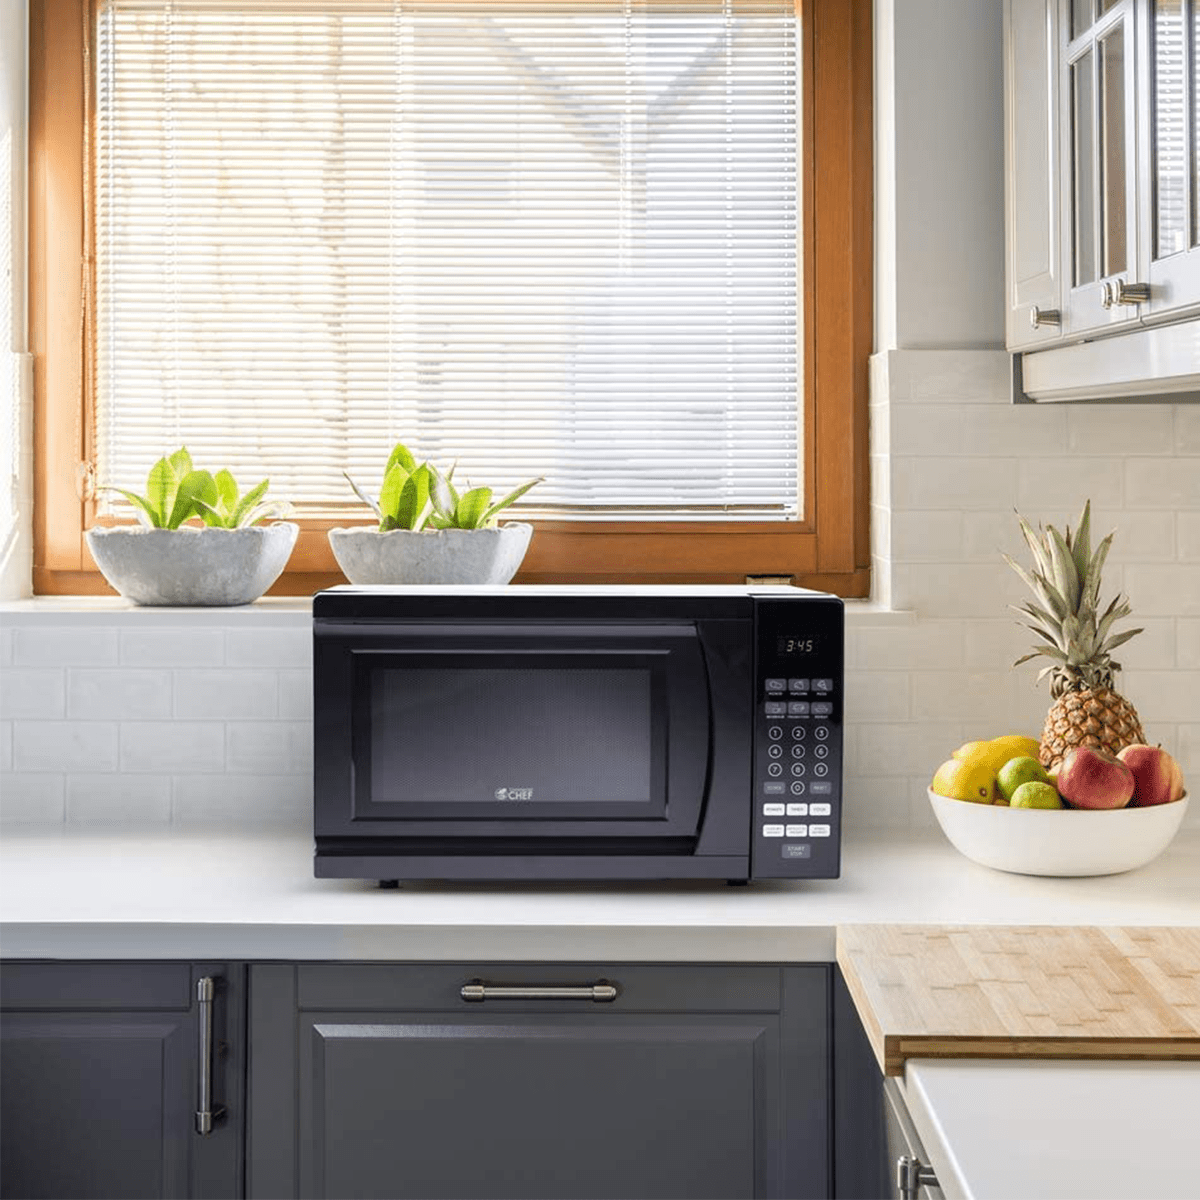 Black Friday Microwave Deals That Will Make Waves in Your Kitchen